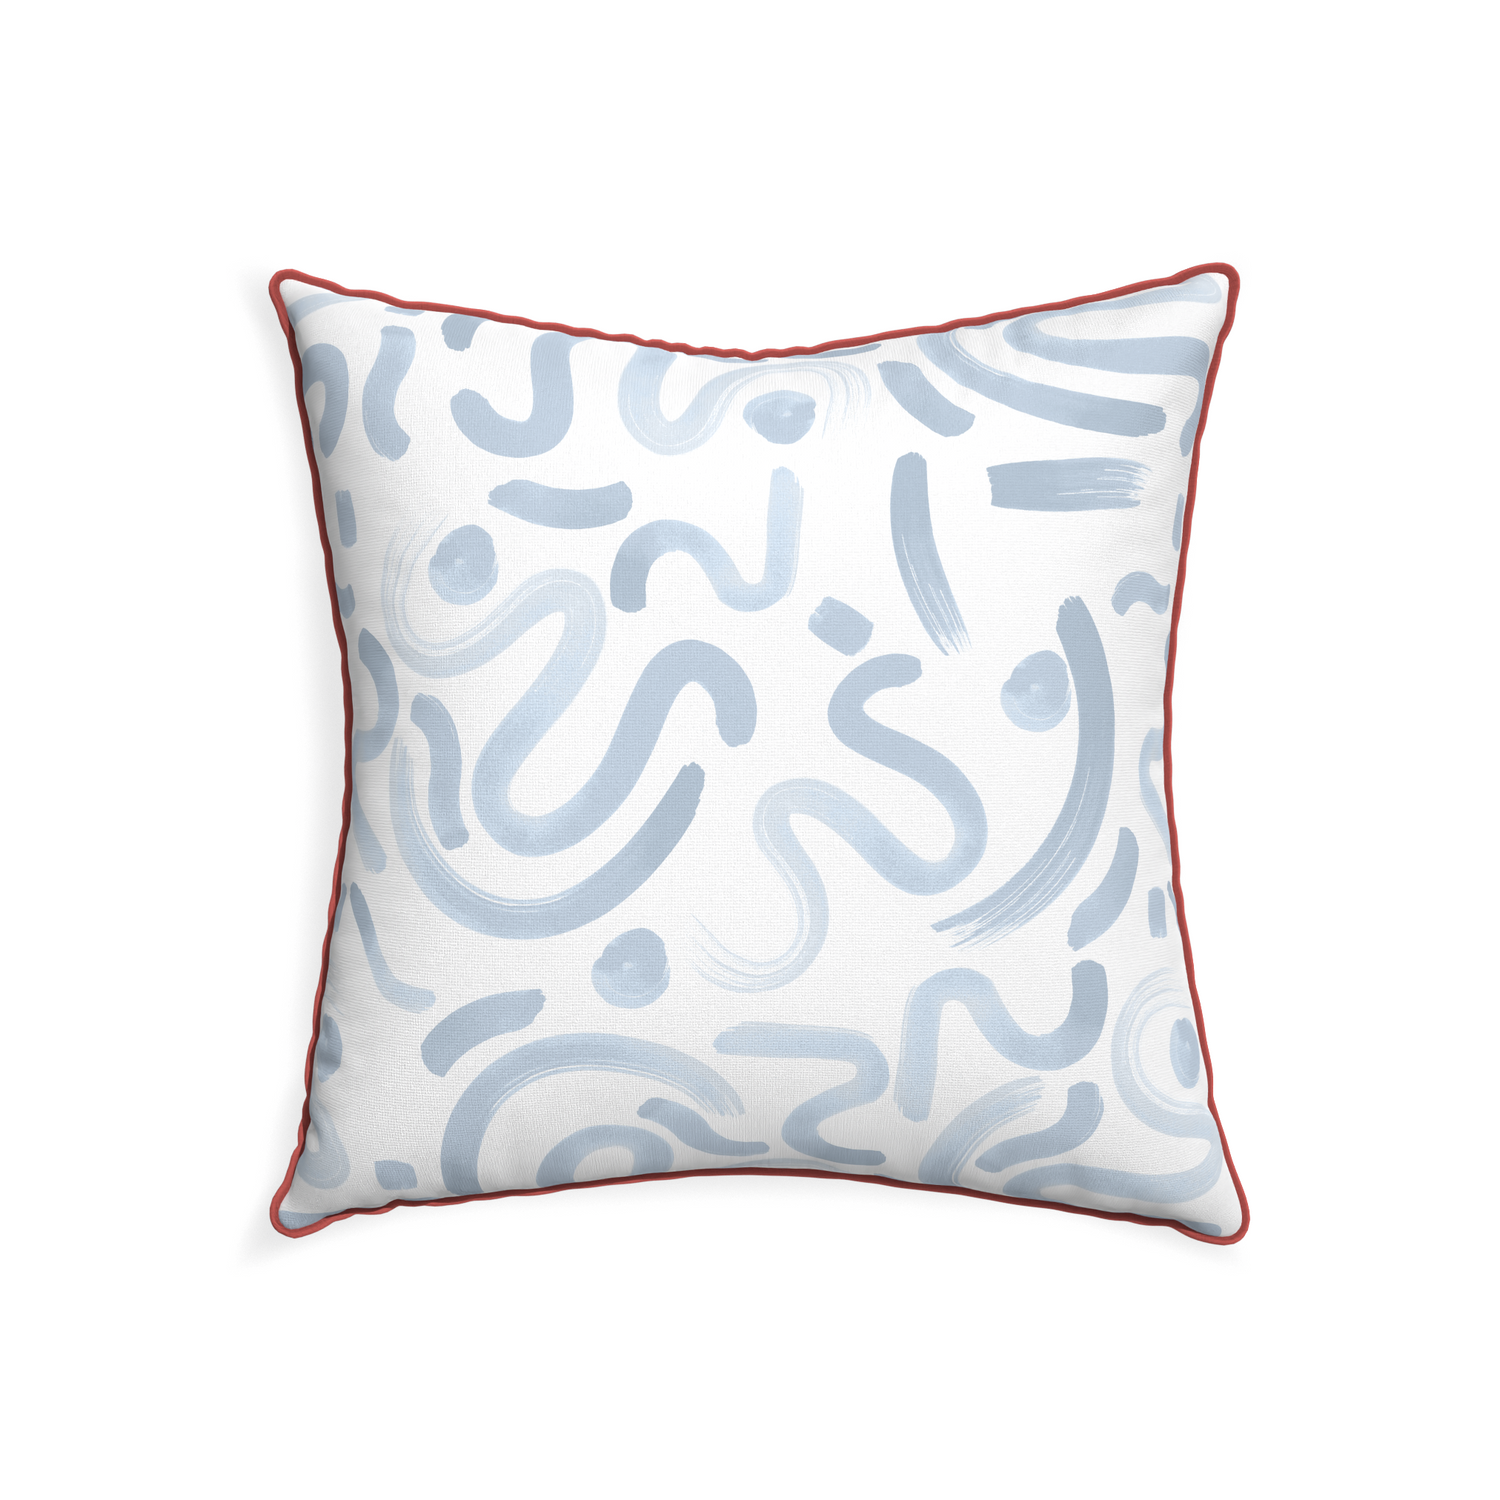 22-square hockney sky custom pillow with c piping on white background